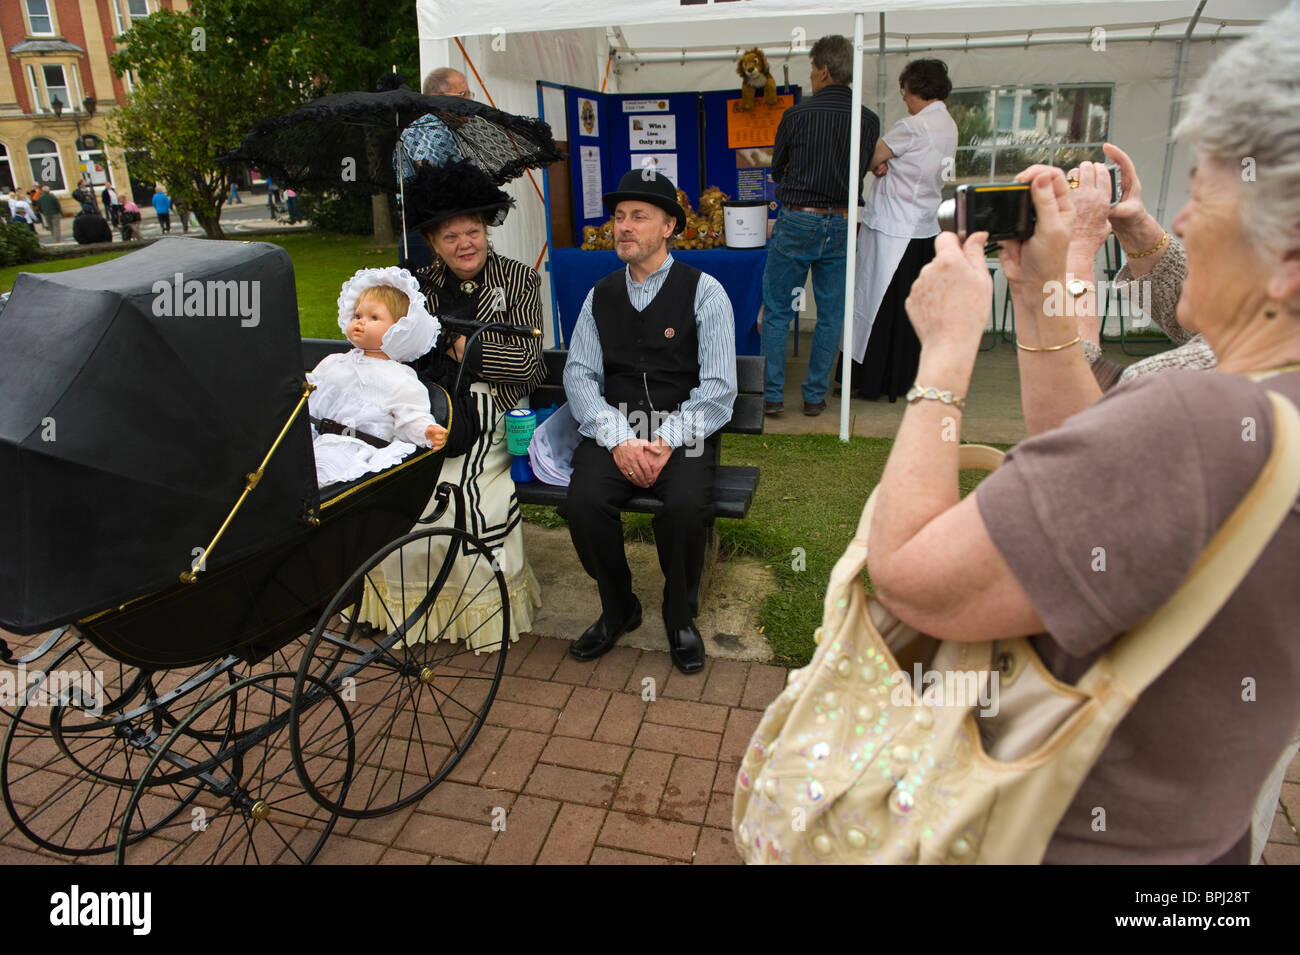 Family with baby in pram in period costume being photographed at the Victorian Festival in Llandrindod Wells Powys Mid Wales UK Stock Photo